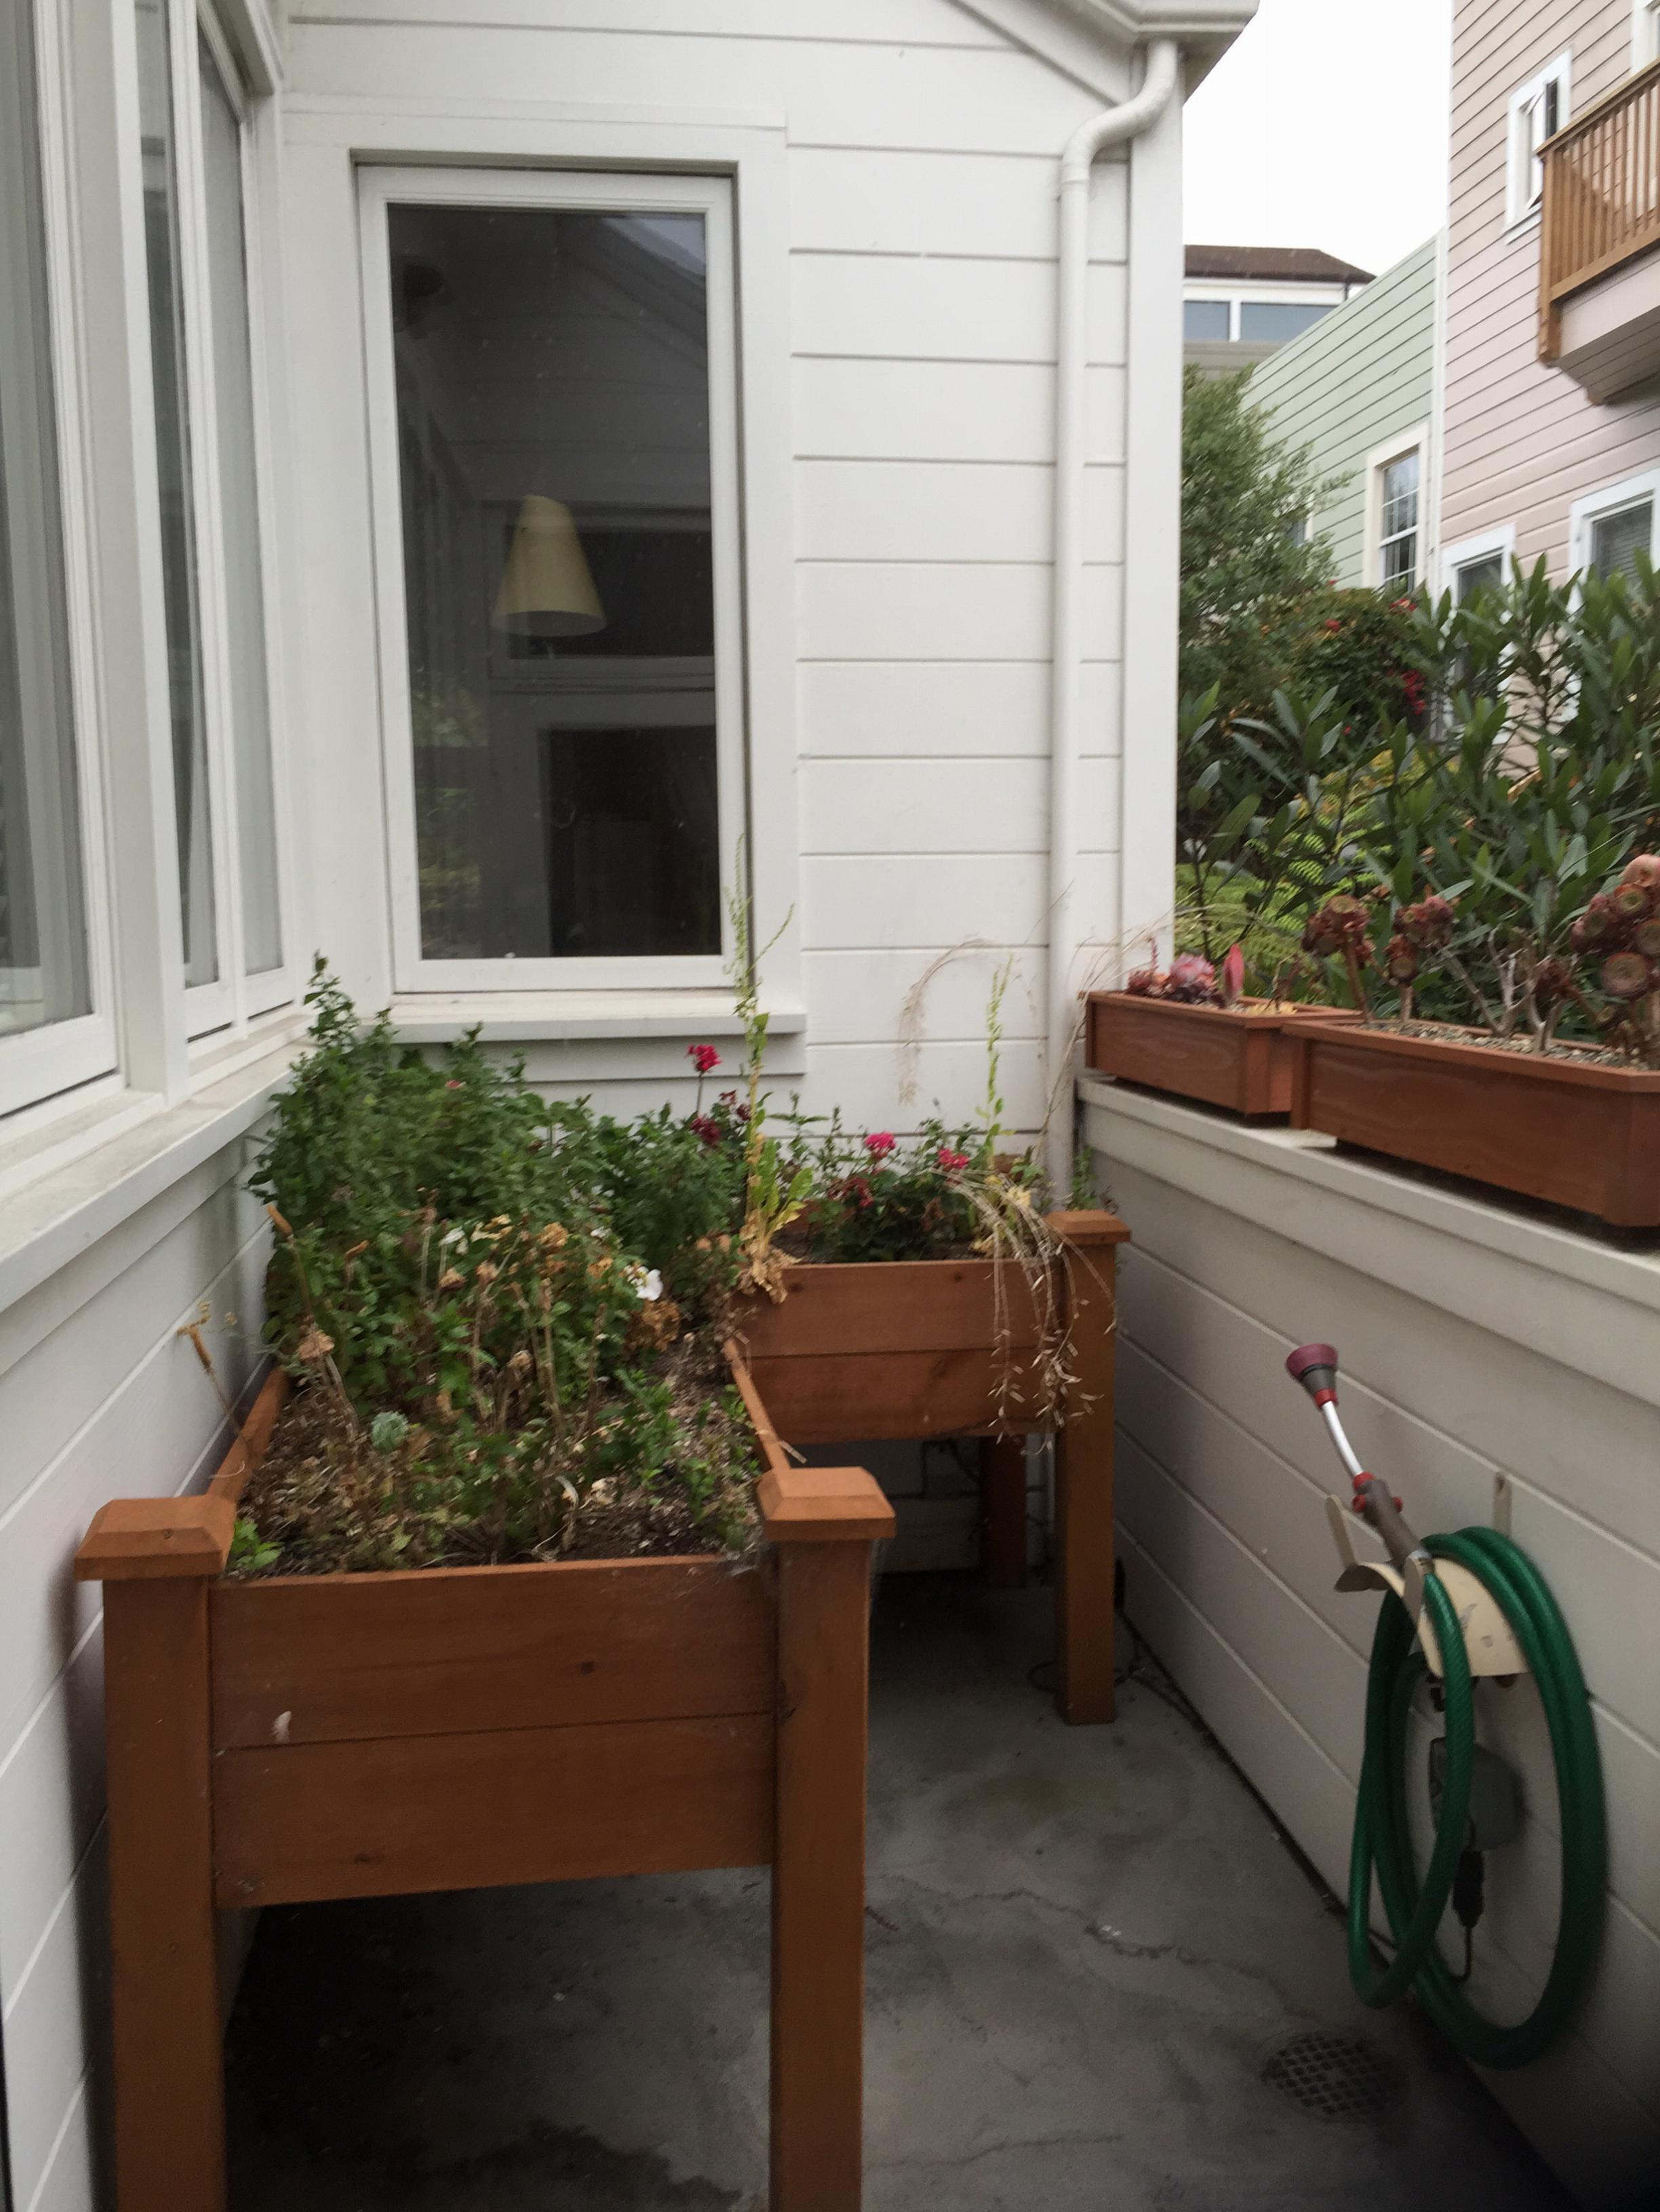 Planter boxes at old house